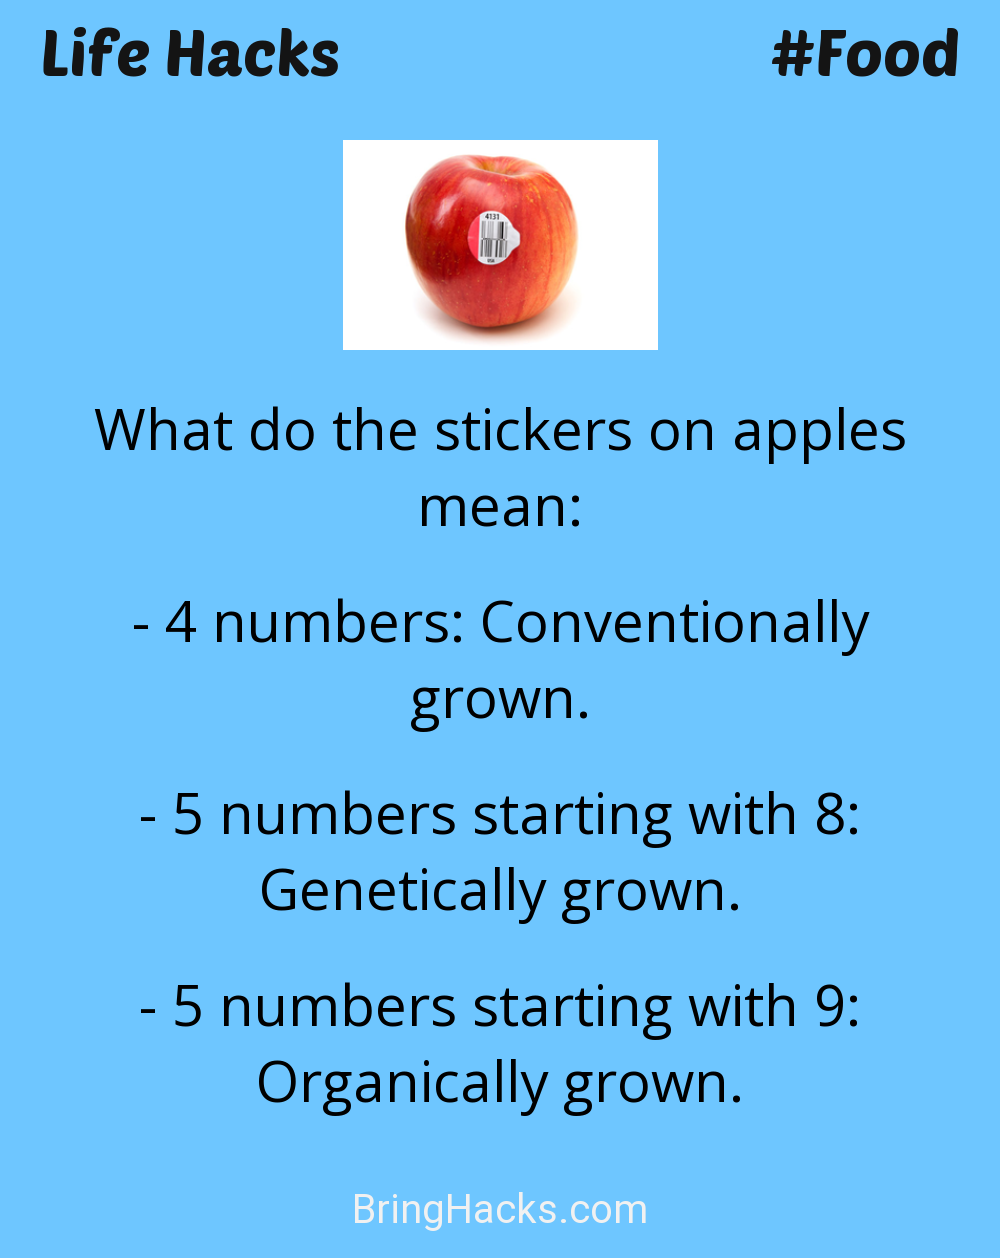 Life Hacks: - What do the stickers on apples mean:
4 numbers: Conventionally grown.5 numbers starting with 8: Genetically grown.5 numbers starting with 9: Organically grown.